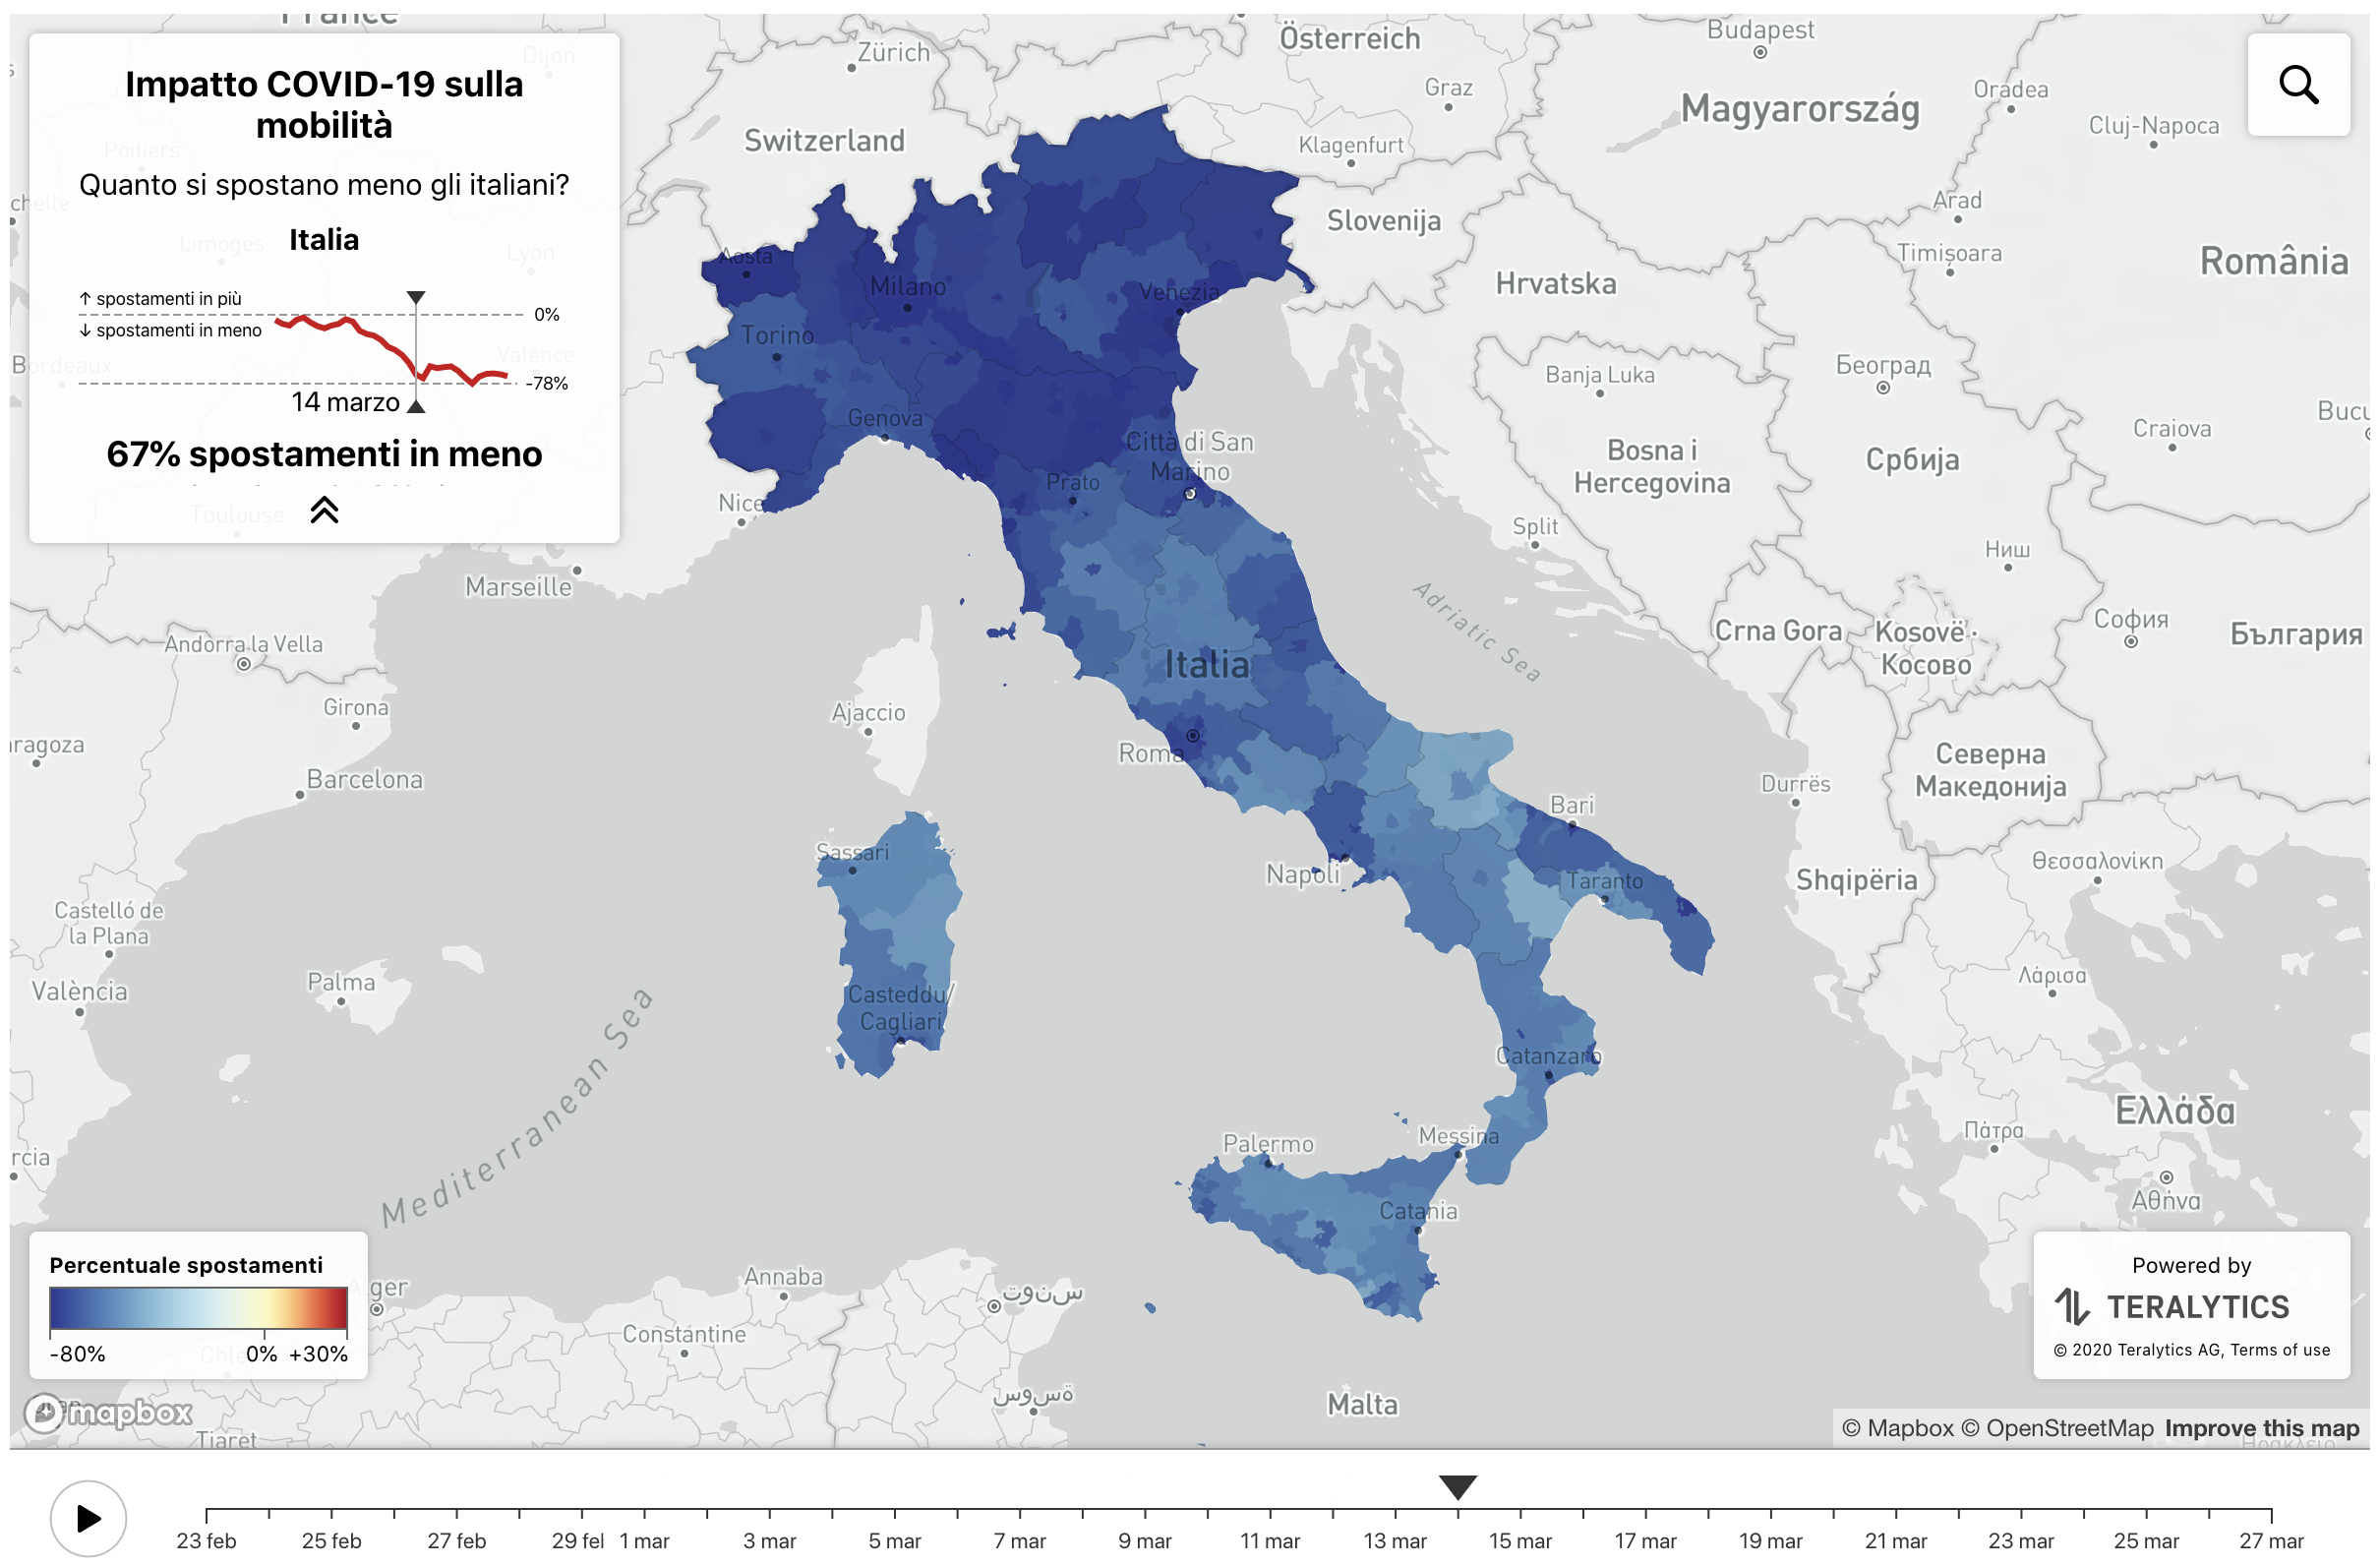 Effect of COVID-19 on mobility in Italy